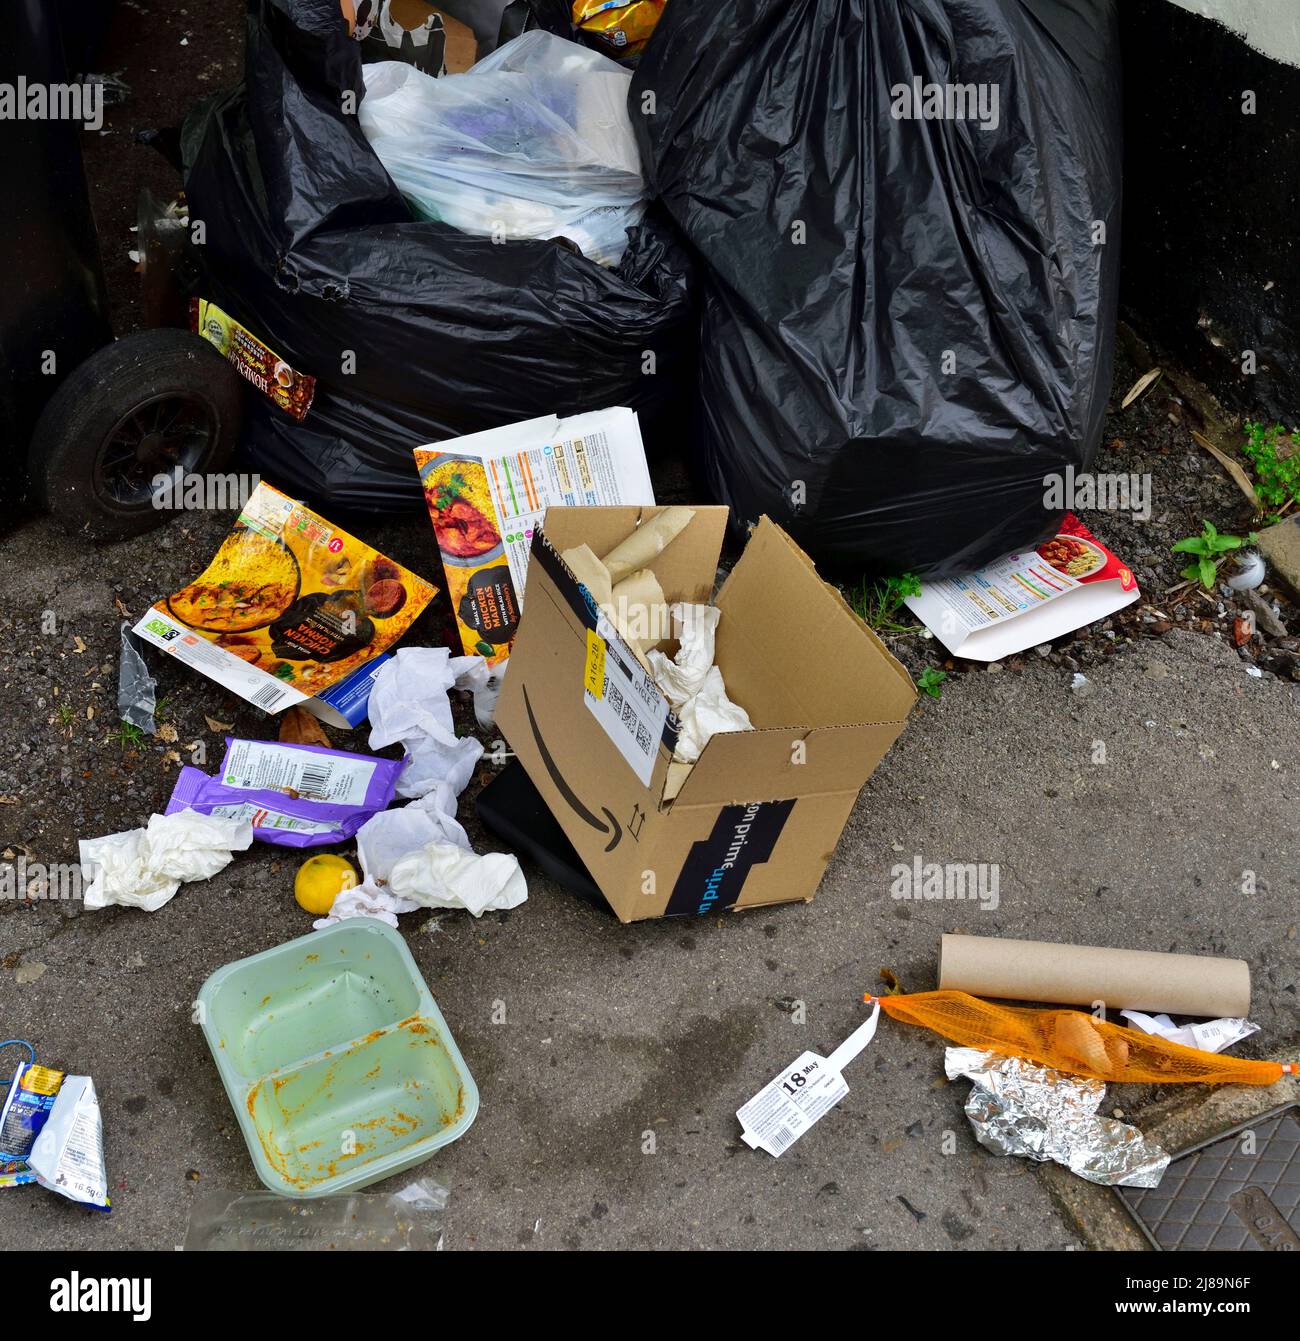 Rubbish bags, litter, dumped on pavement Stock Photo